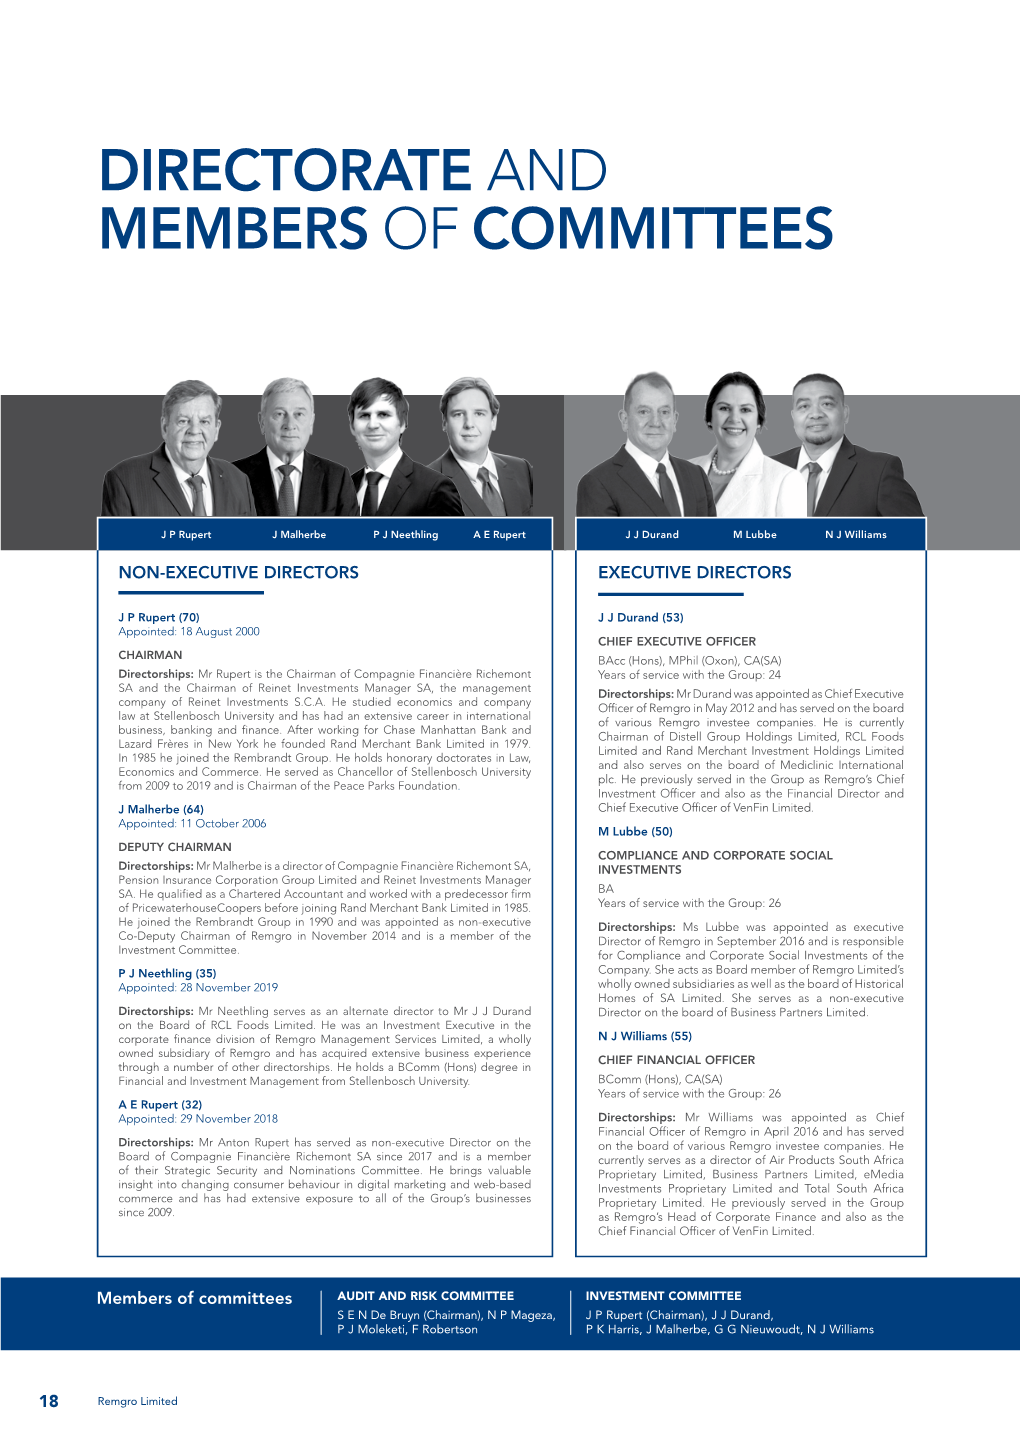 Directorate and Members of Committees